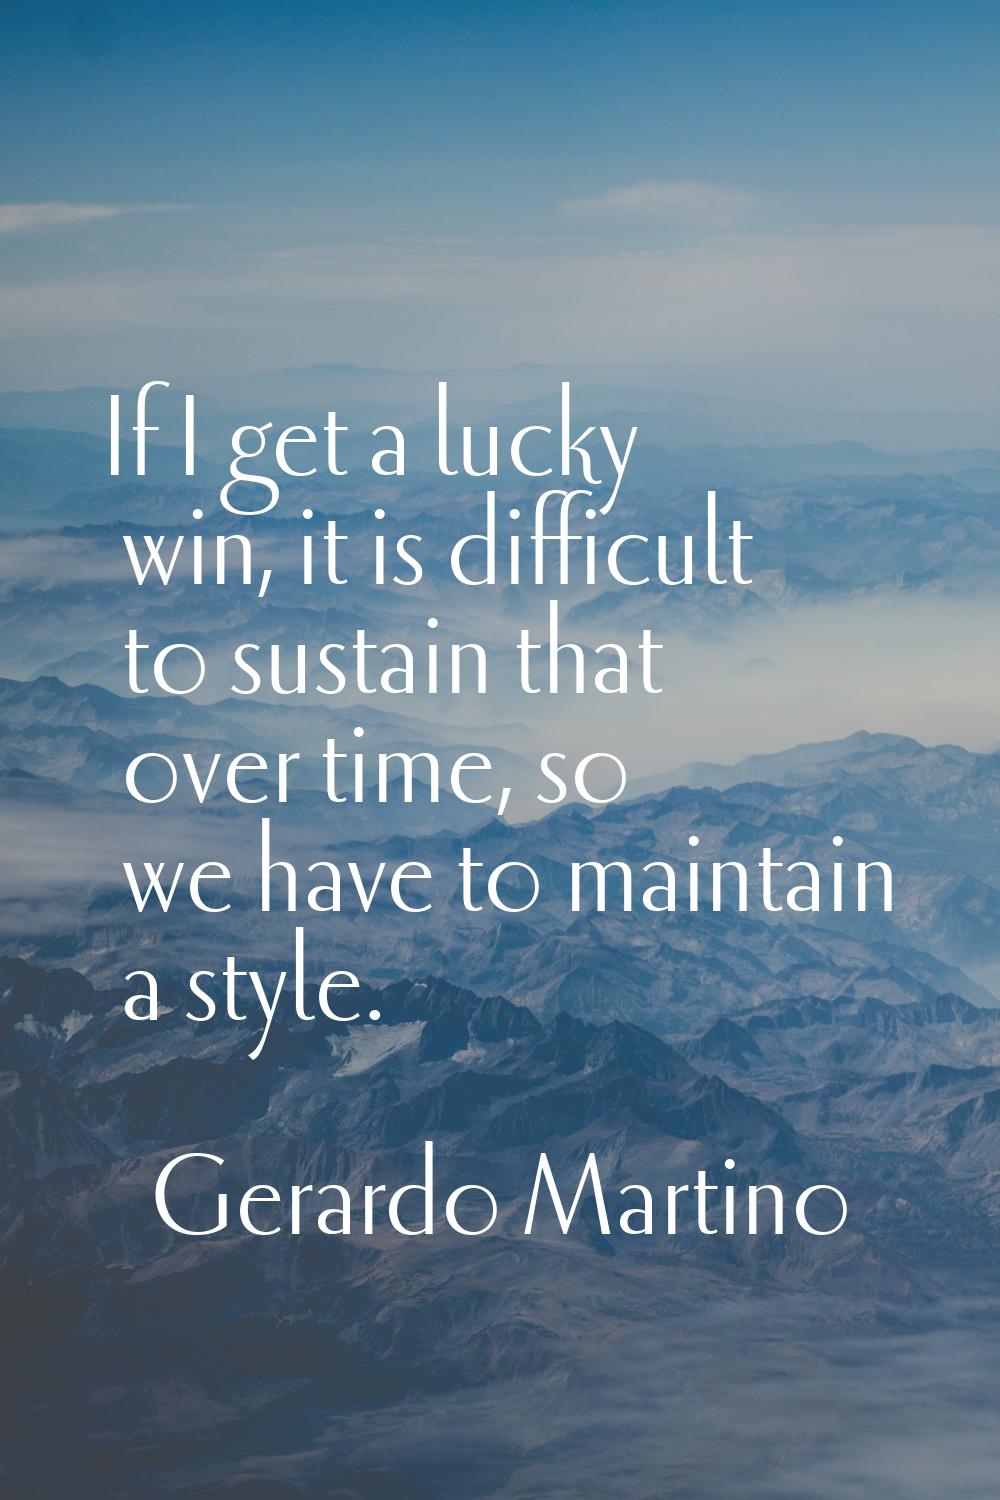 If I get a lucky win, it is difficult to sustain that over time, so we have to maintain a style.